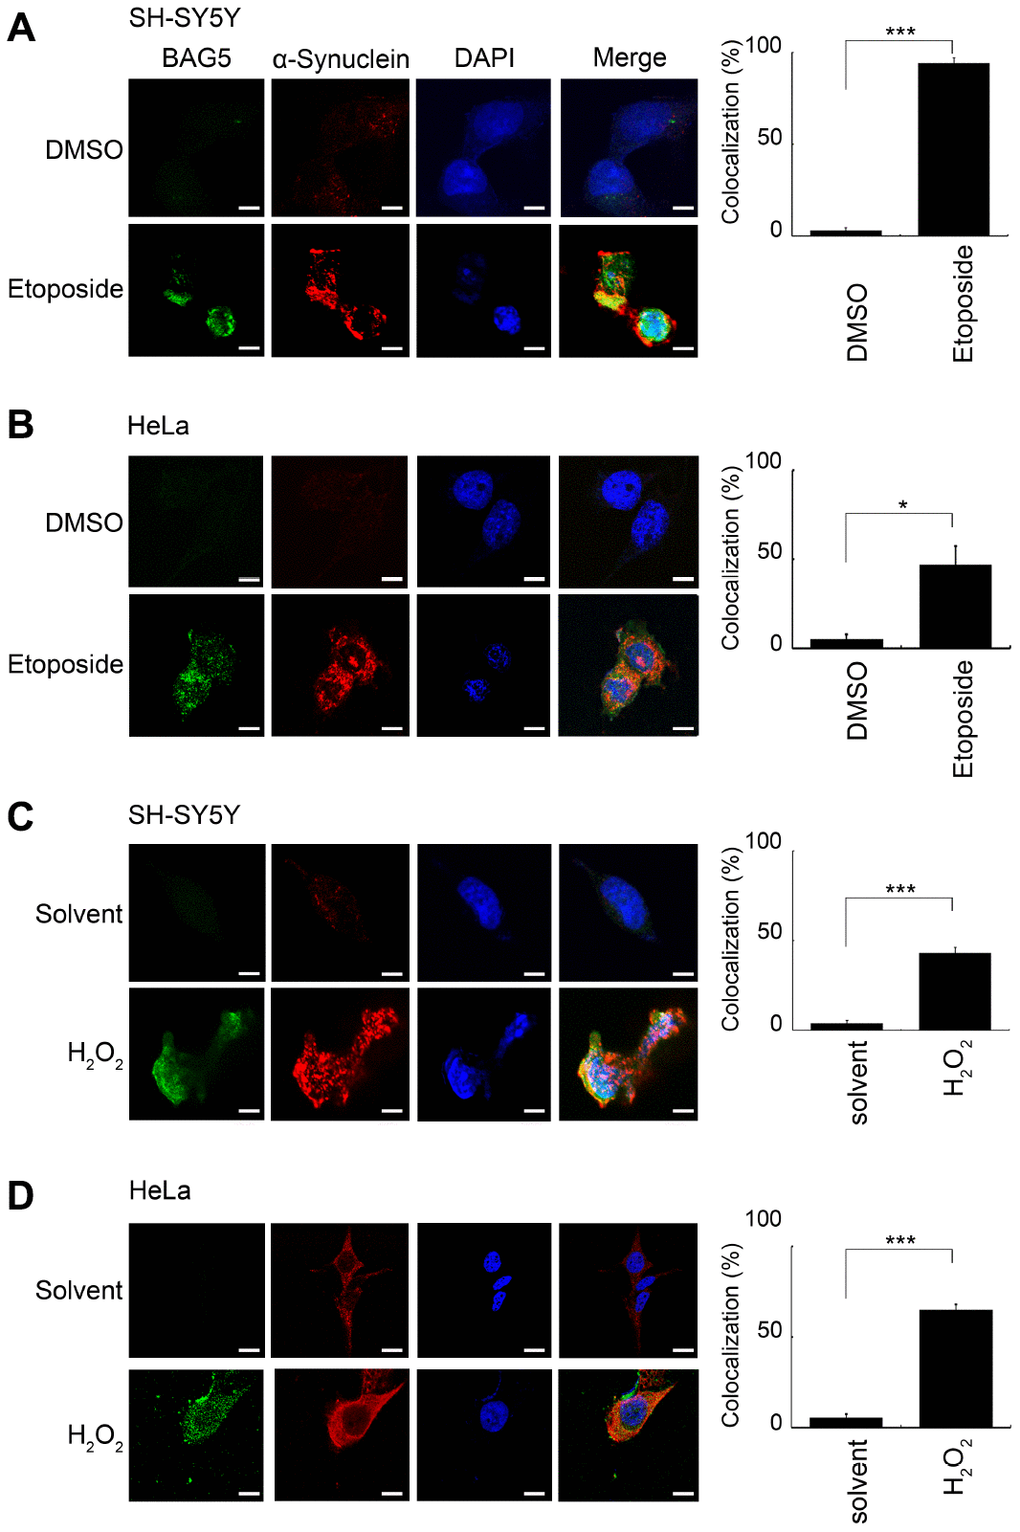 BAG5 is activated upon stresses and colocalized with α-synuclein in the perinuclear compartment. After 24 or 48 h of pretreatment with 10 μM of etoposide or 250 μM of H2O2, treated SH-SY5Y (A, C) or HeLa (B, D) cells were paraformaldehyde-fixed and stained using specific BAG5 (green) and α-synuclein (red) antibodies, and DAPI (blue) was used to stain the nuclear DNA. The images (1,260 x) were acquired using an LSM 510 Meta Confocal Microscope (Zeiss). The scale bar shows 20 μm. The percentage of cells with colocalization was determined by counting yellow blobs of at least 1,000 cells (Student’s t-test; *, p p 